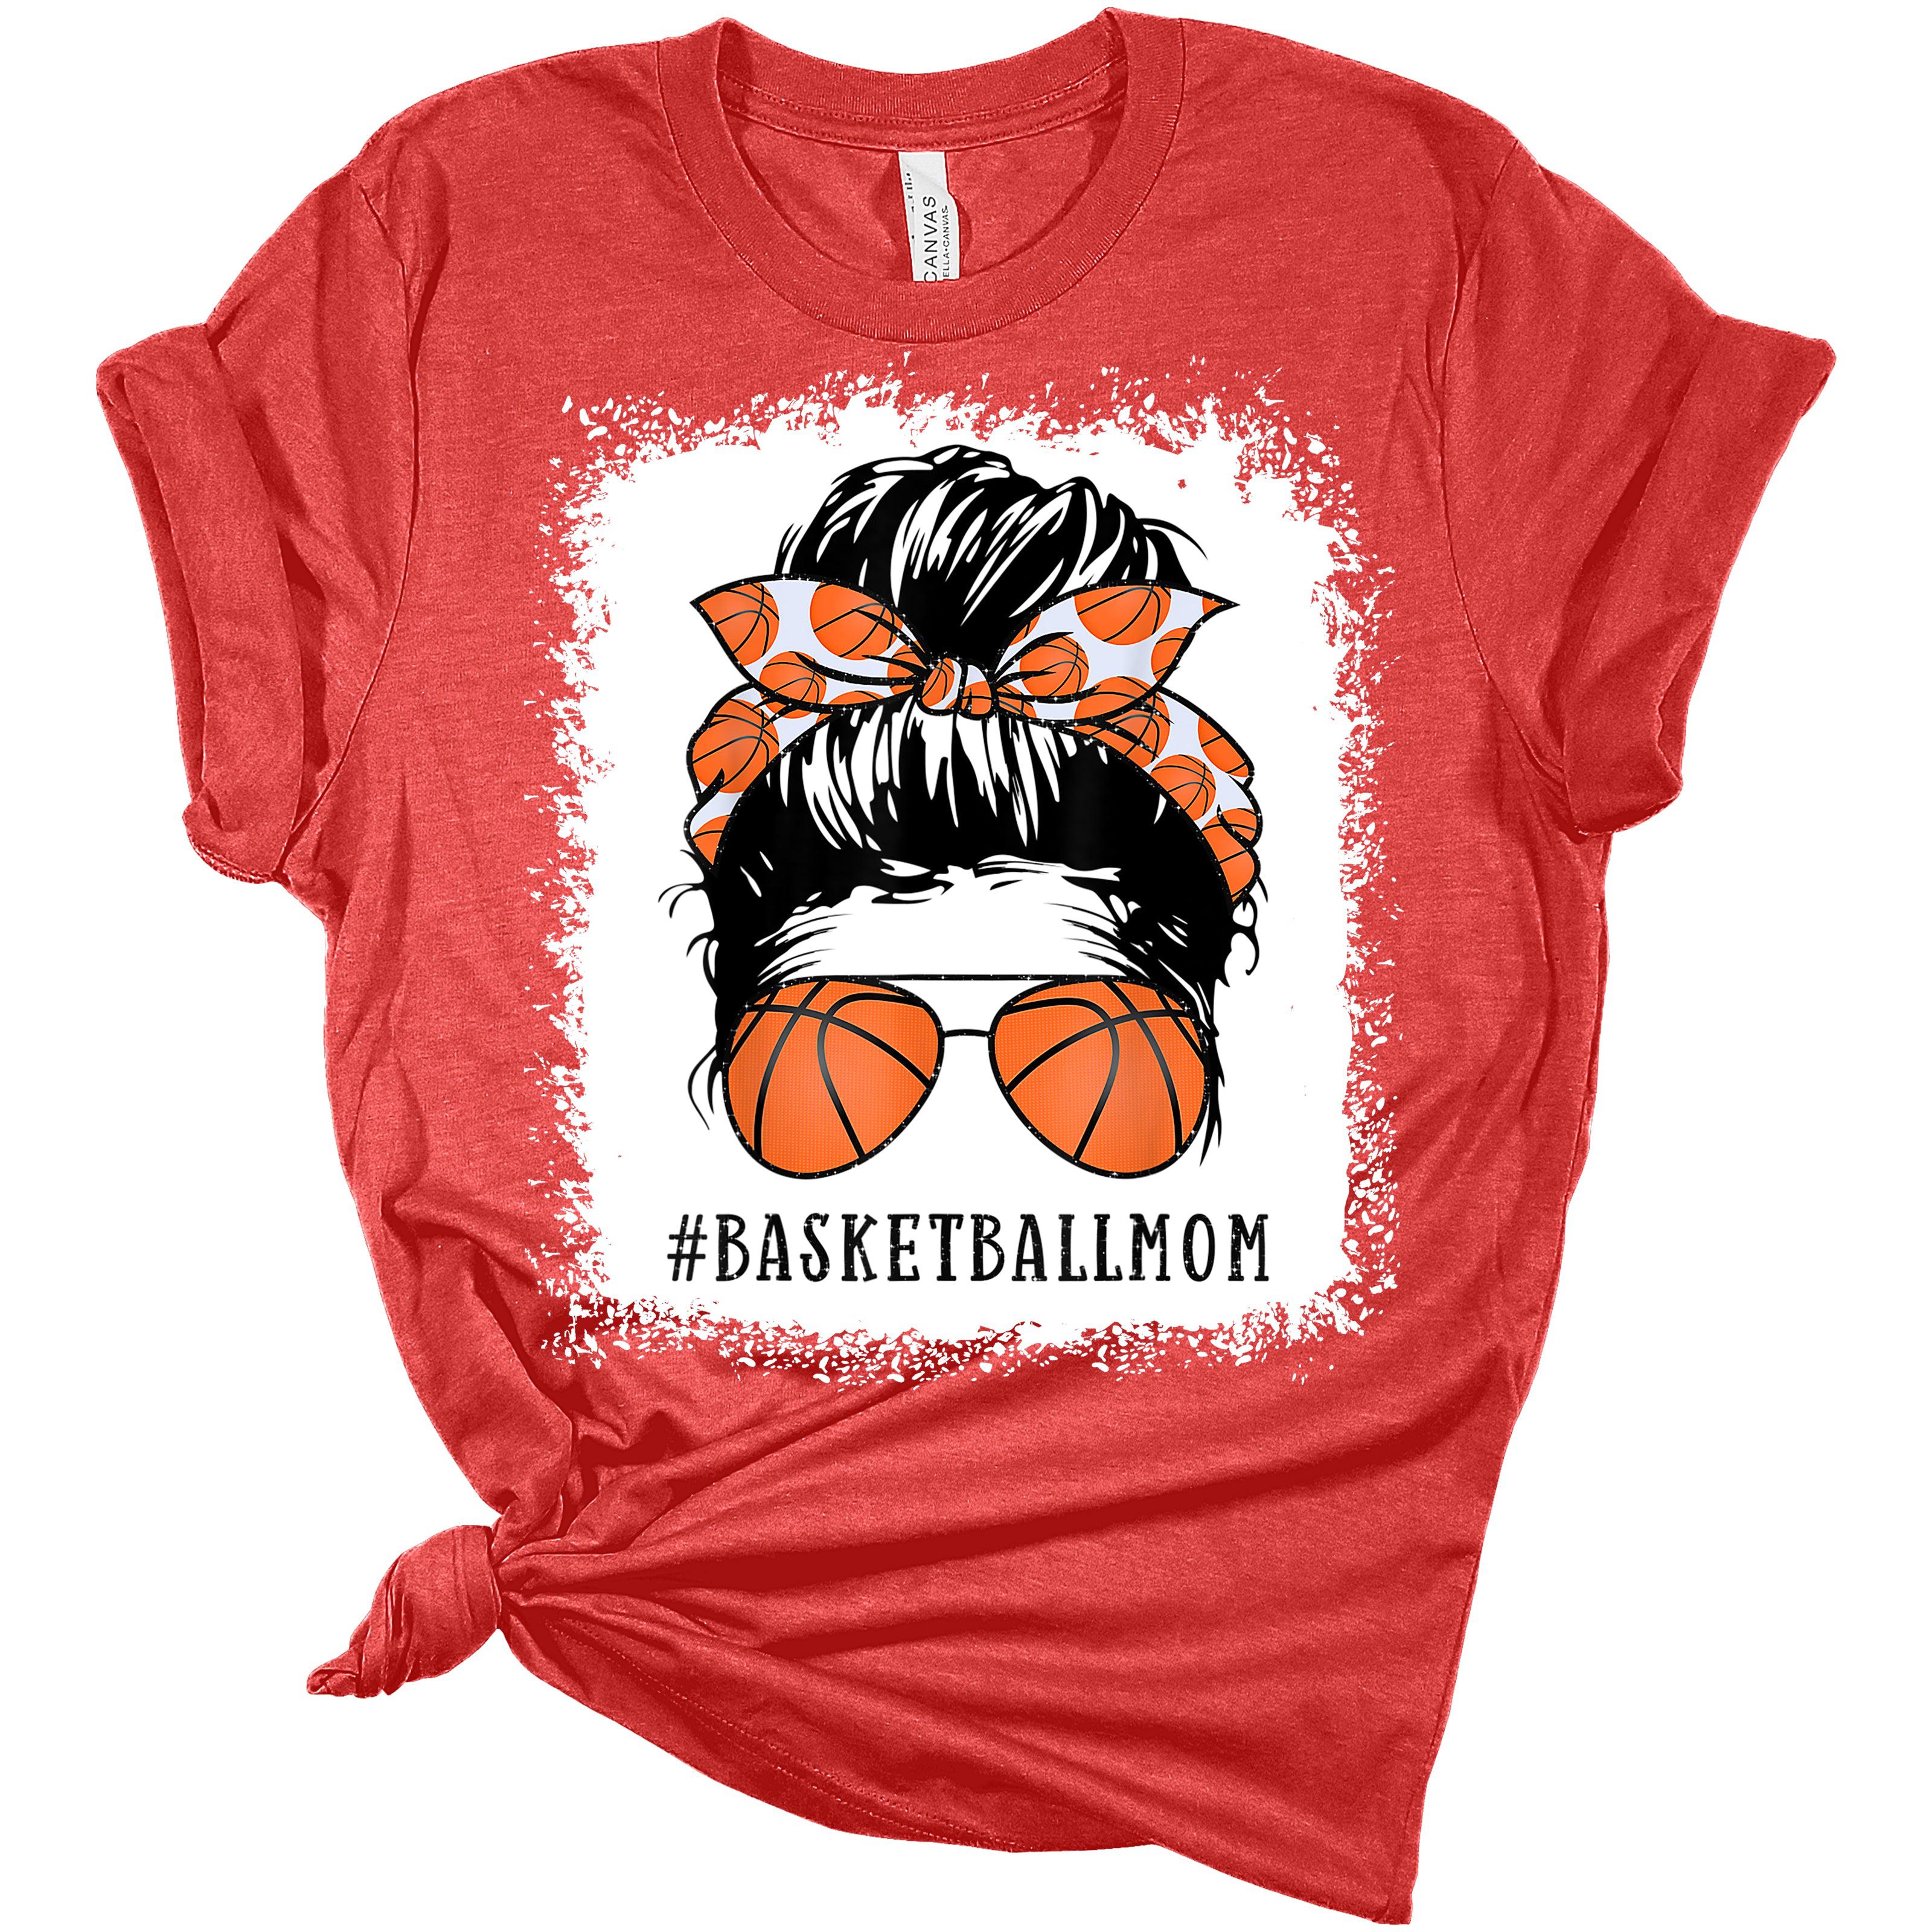 Basketball t shirt designs, Basketball clothes, Active wear outfits